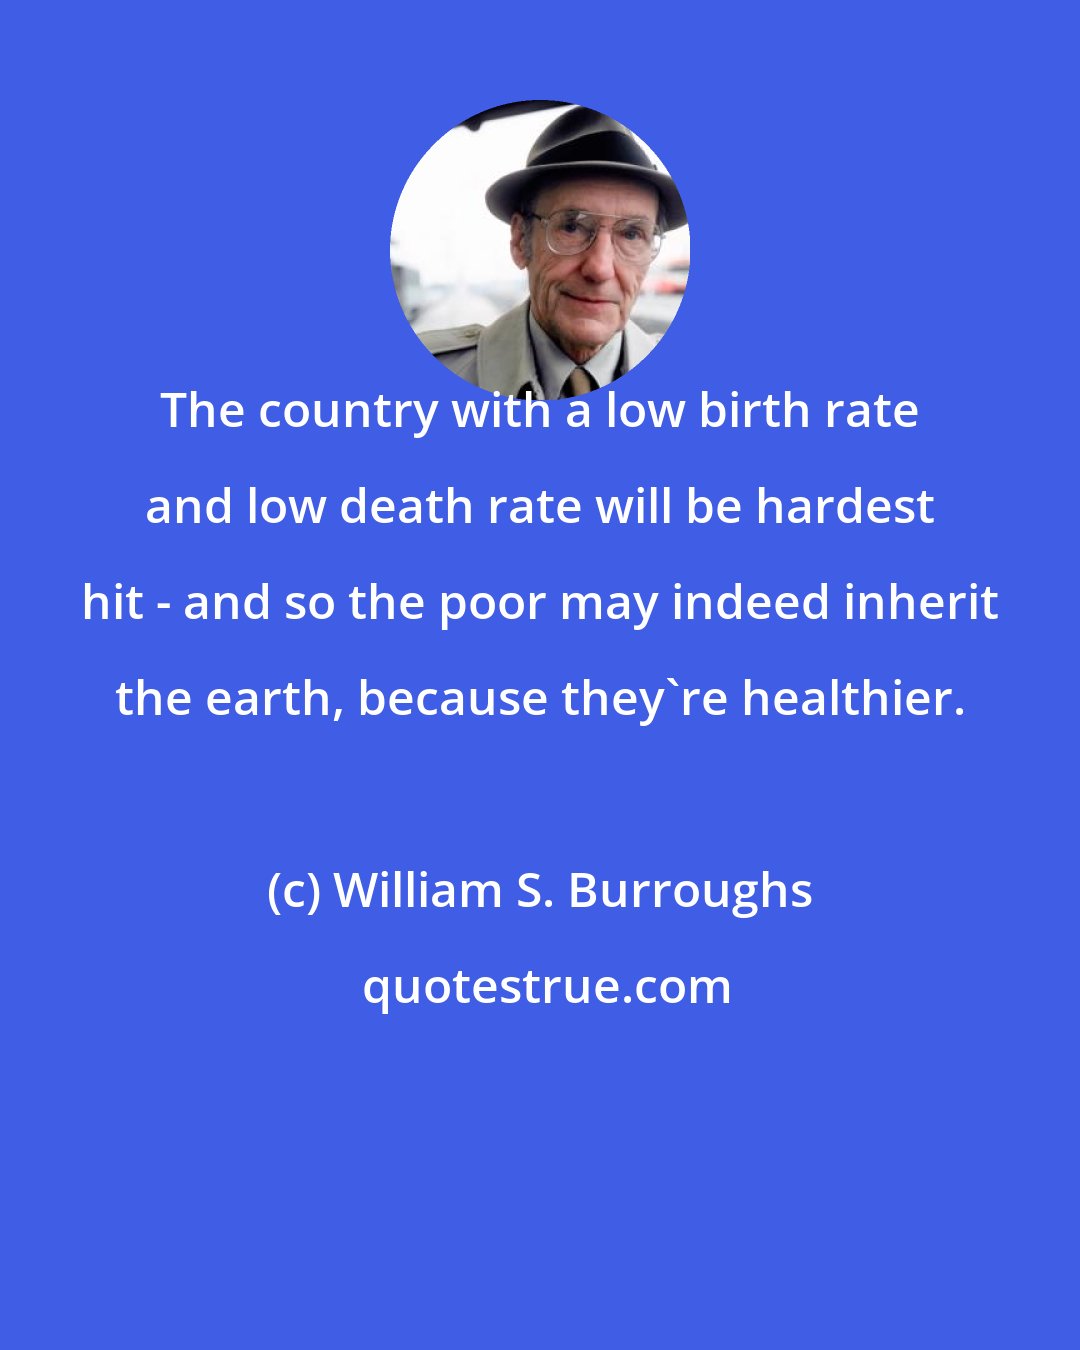 William S. Burroughs: The country with a low birth rate and low death rate will be hardest hit - and so the poor may indeed inherit the earth, because they're healthier.